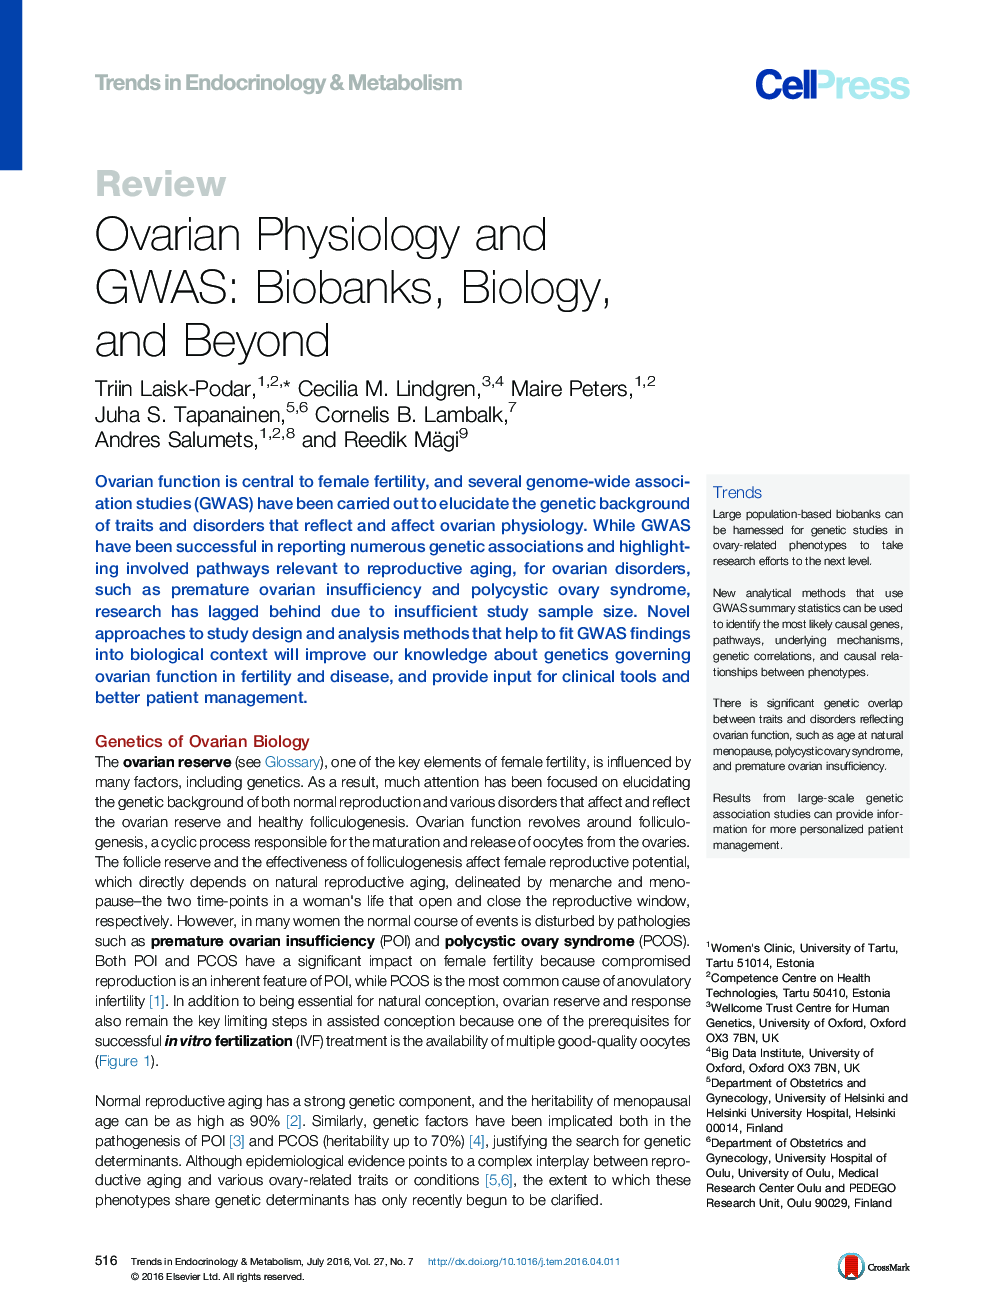 Ovarian Physiology and GWAS: Biobanks, Biology, and Beyond